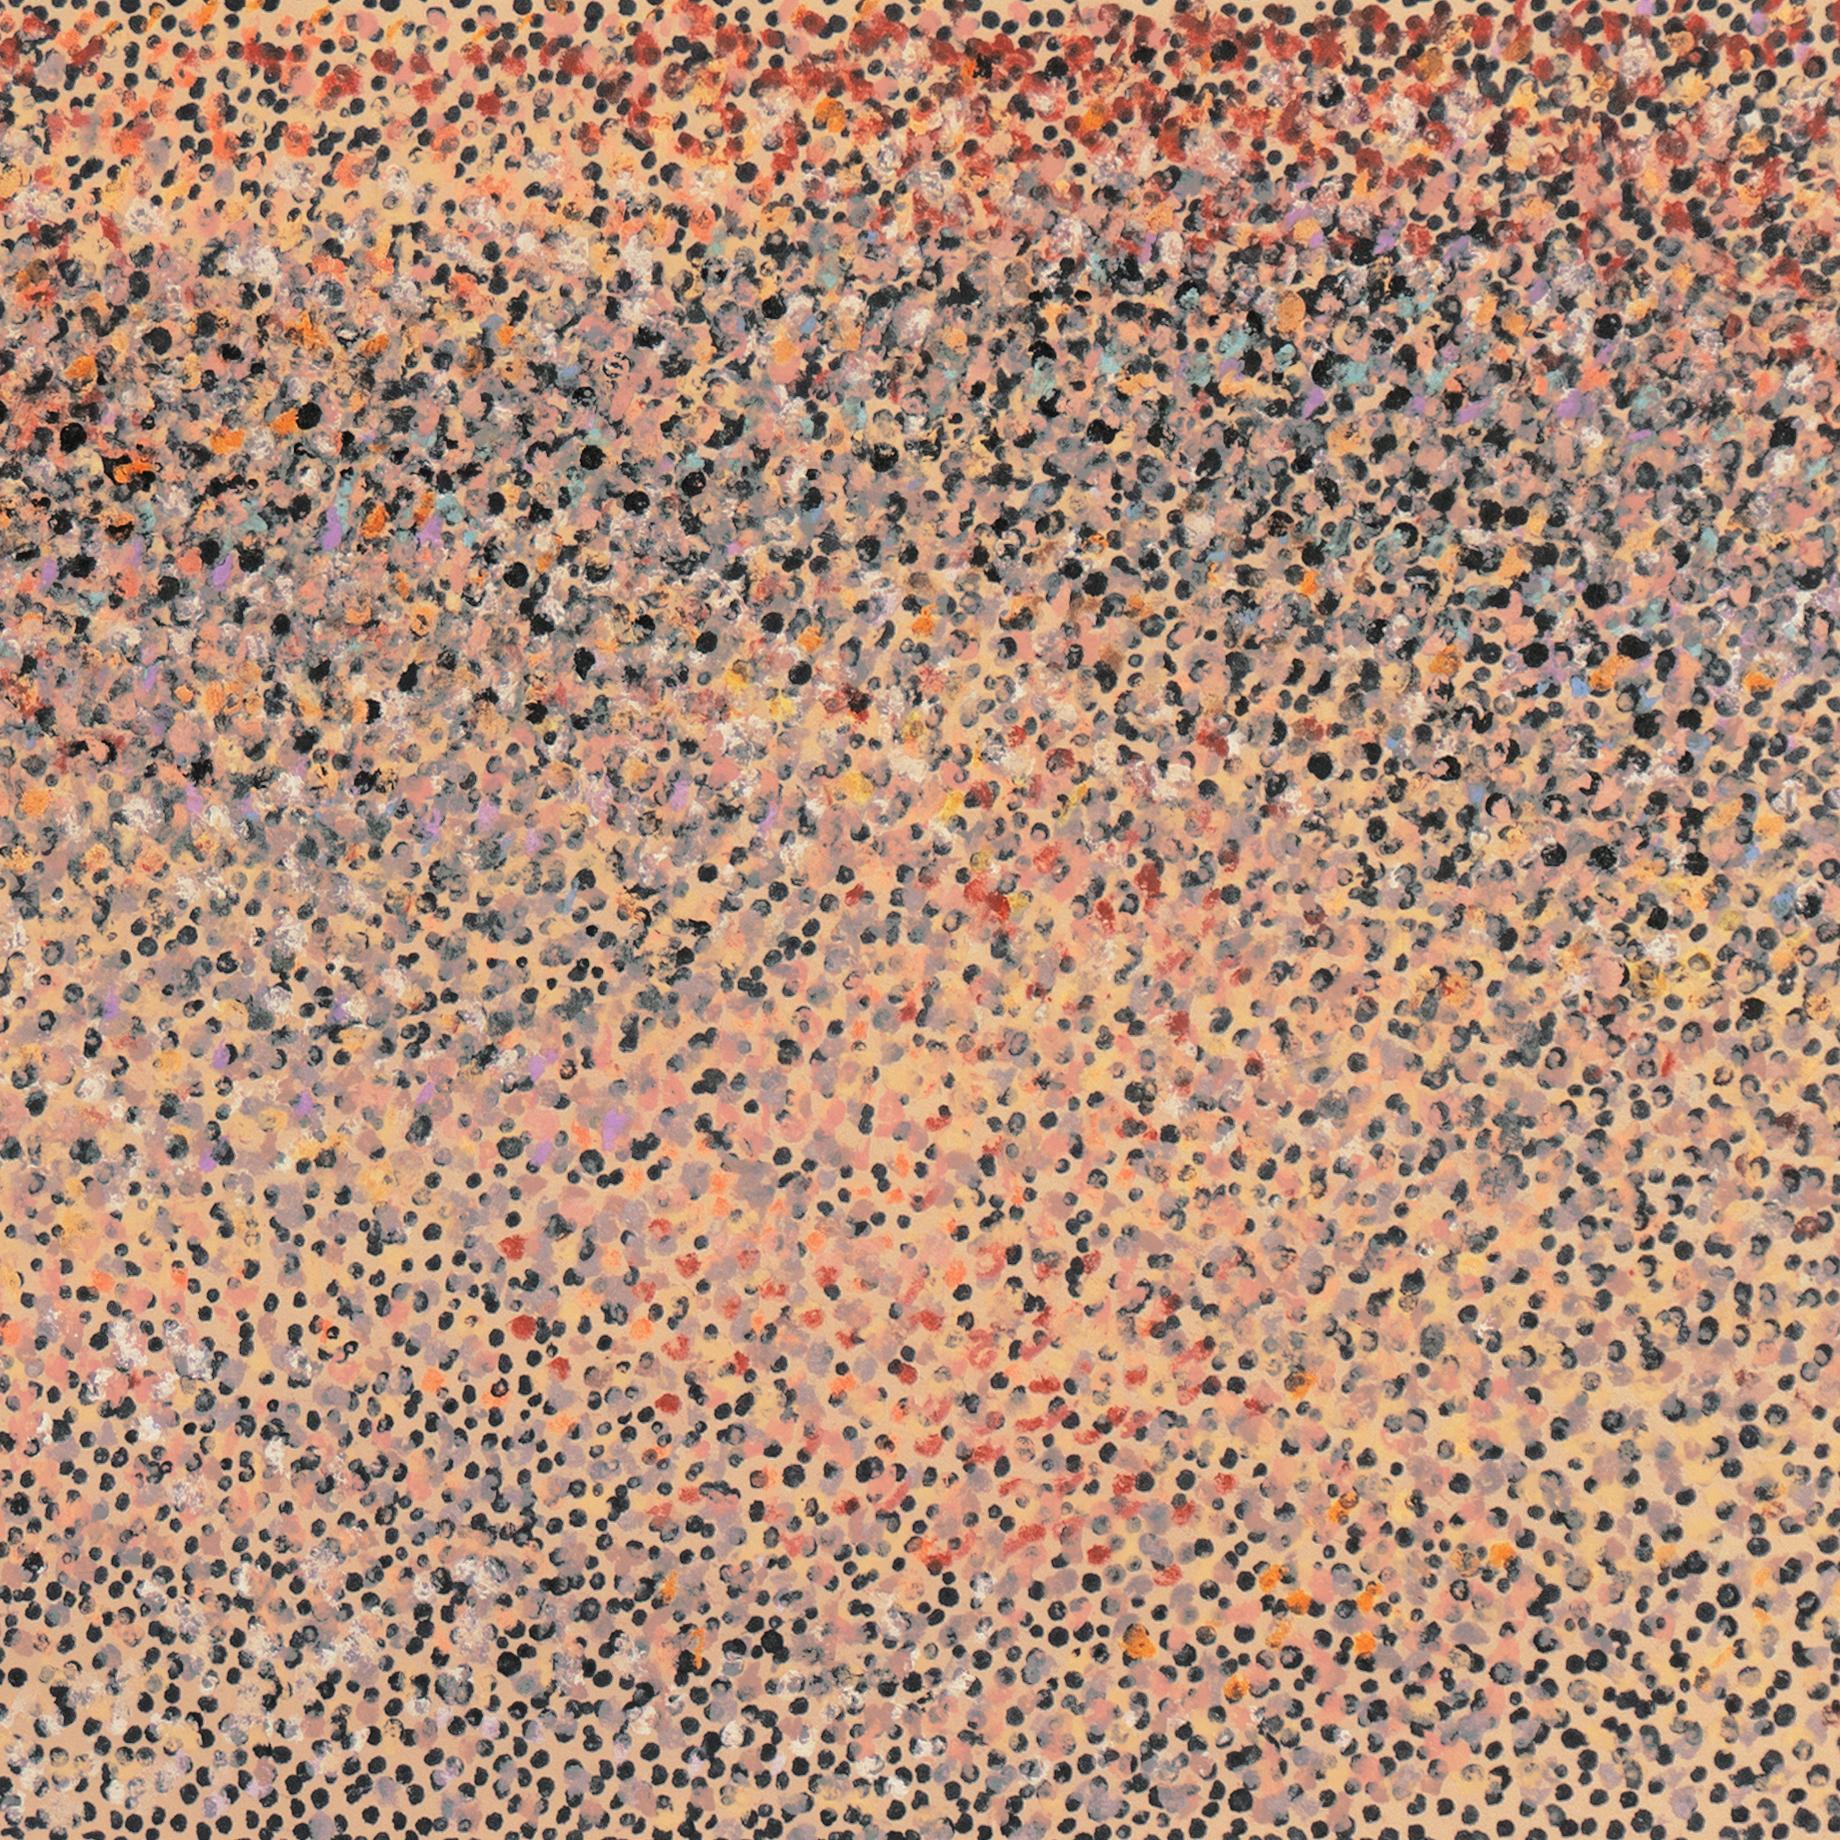 'Pointillist Abstract', Paris, Étretat, New York, Whitney Museum, MoMA, PAFA - Abstract Expressionist Art by Manfred Schwartz